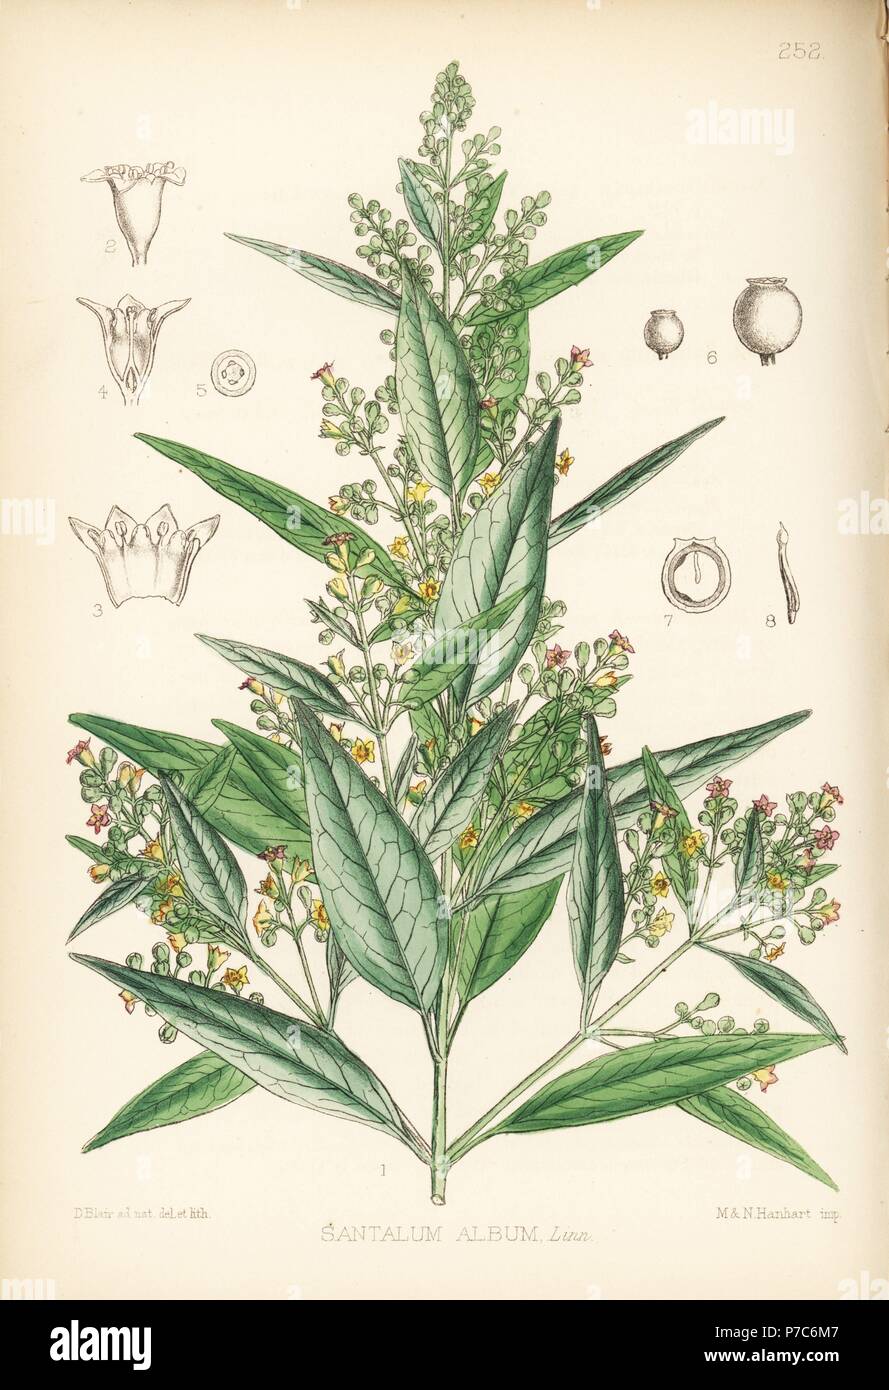 Indian sandalwood, yellow sanders wood, chandan or chandal, Santalum album. Handcoloured lithograph by Hanhart after a botanical illustration by David Blair from Robert Bentley and Henry Trimen's Medicinal Plants, London, 1880. Stock Photo